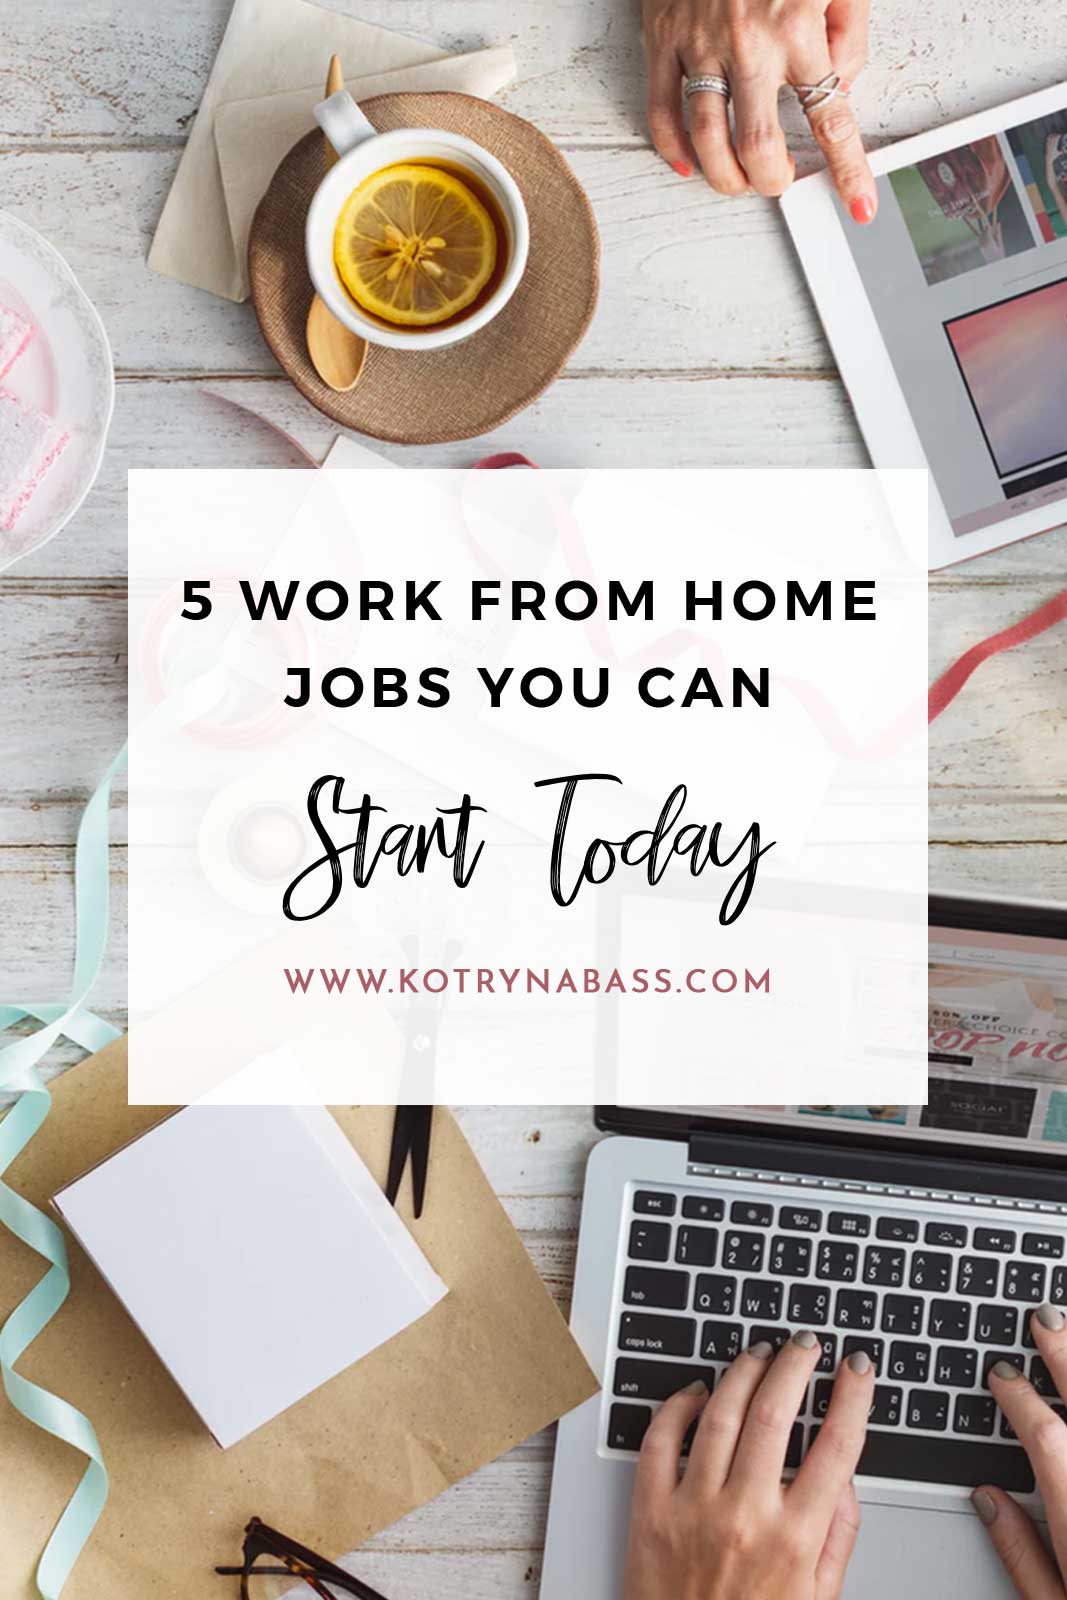 Are you a stay at home mom that wishes to make some extra money for your family? Or are you a college student looking for a chance to take some load off your parents’ shoulders? Or perhaps you’re simply fed up with your current job and would love to try something new & exciting? Whatever the circumstances, working from home can be a great option for you!